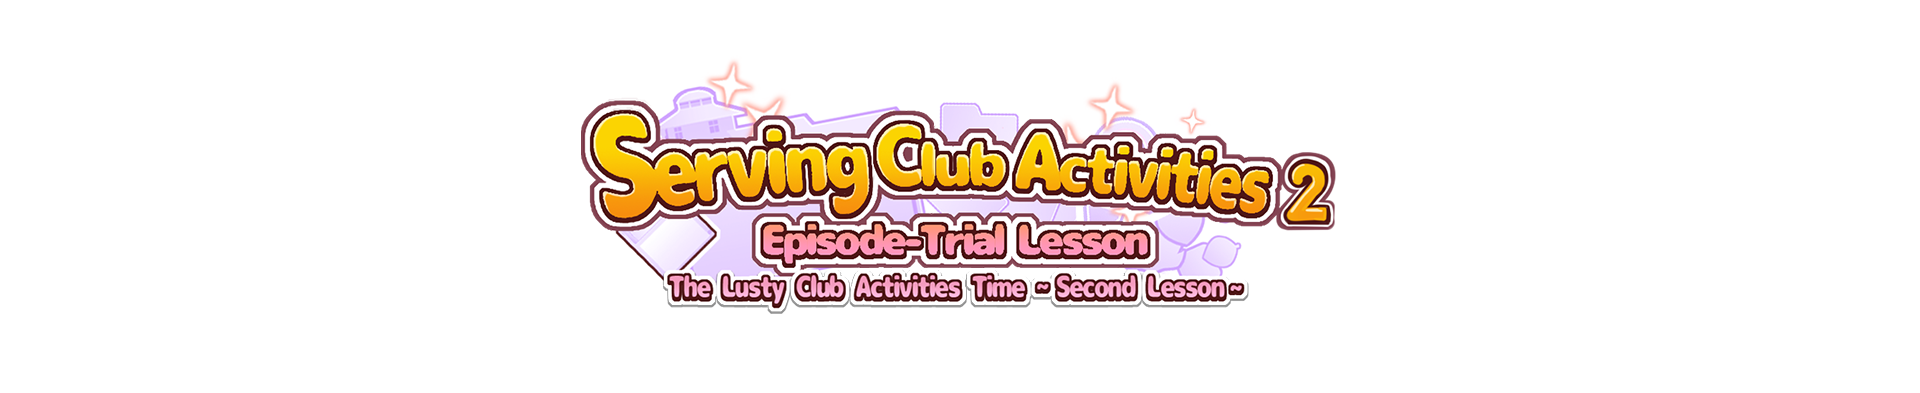 Serving Club Activities Episode-Trial Lesson: The Lusty Club Activities Time ~Second Lesson~